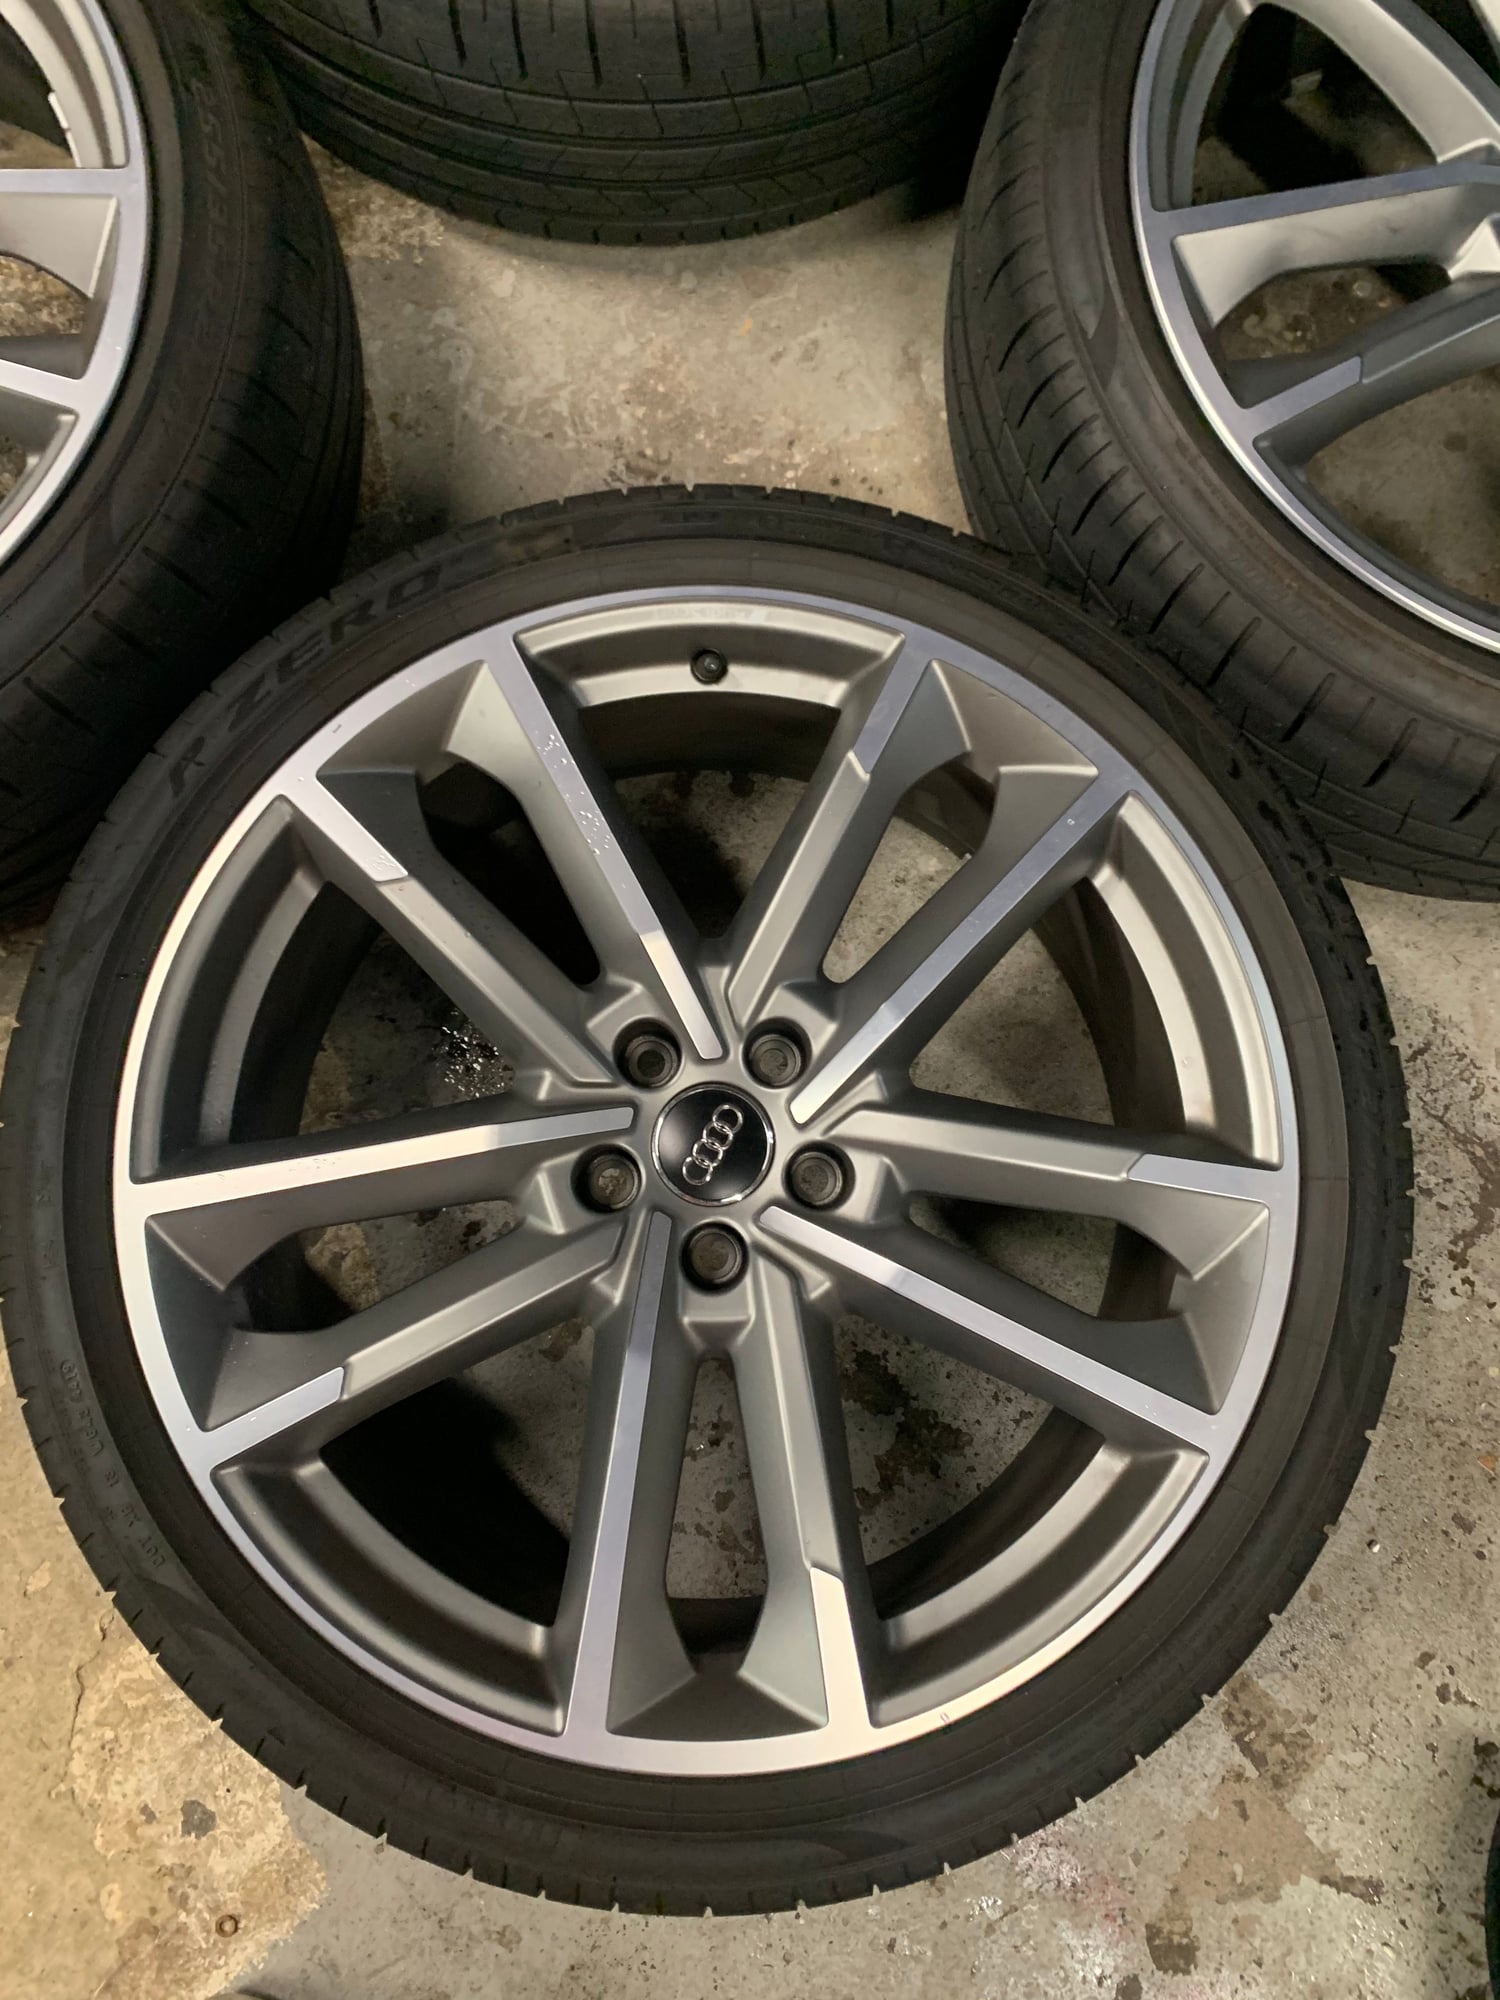 Wheels and Tires/Axles - 21 inch Rims with Tires - Used - 0  All Models - North Providence, RI 02911, United States